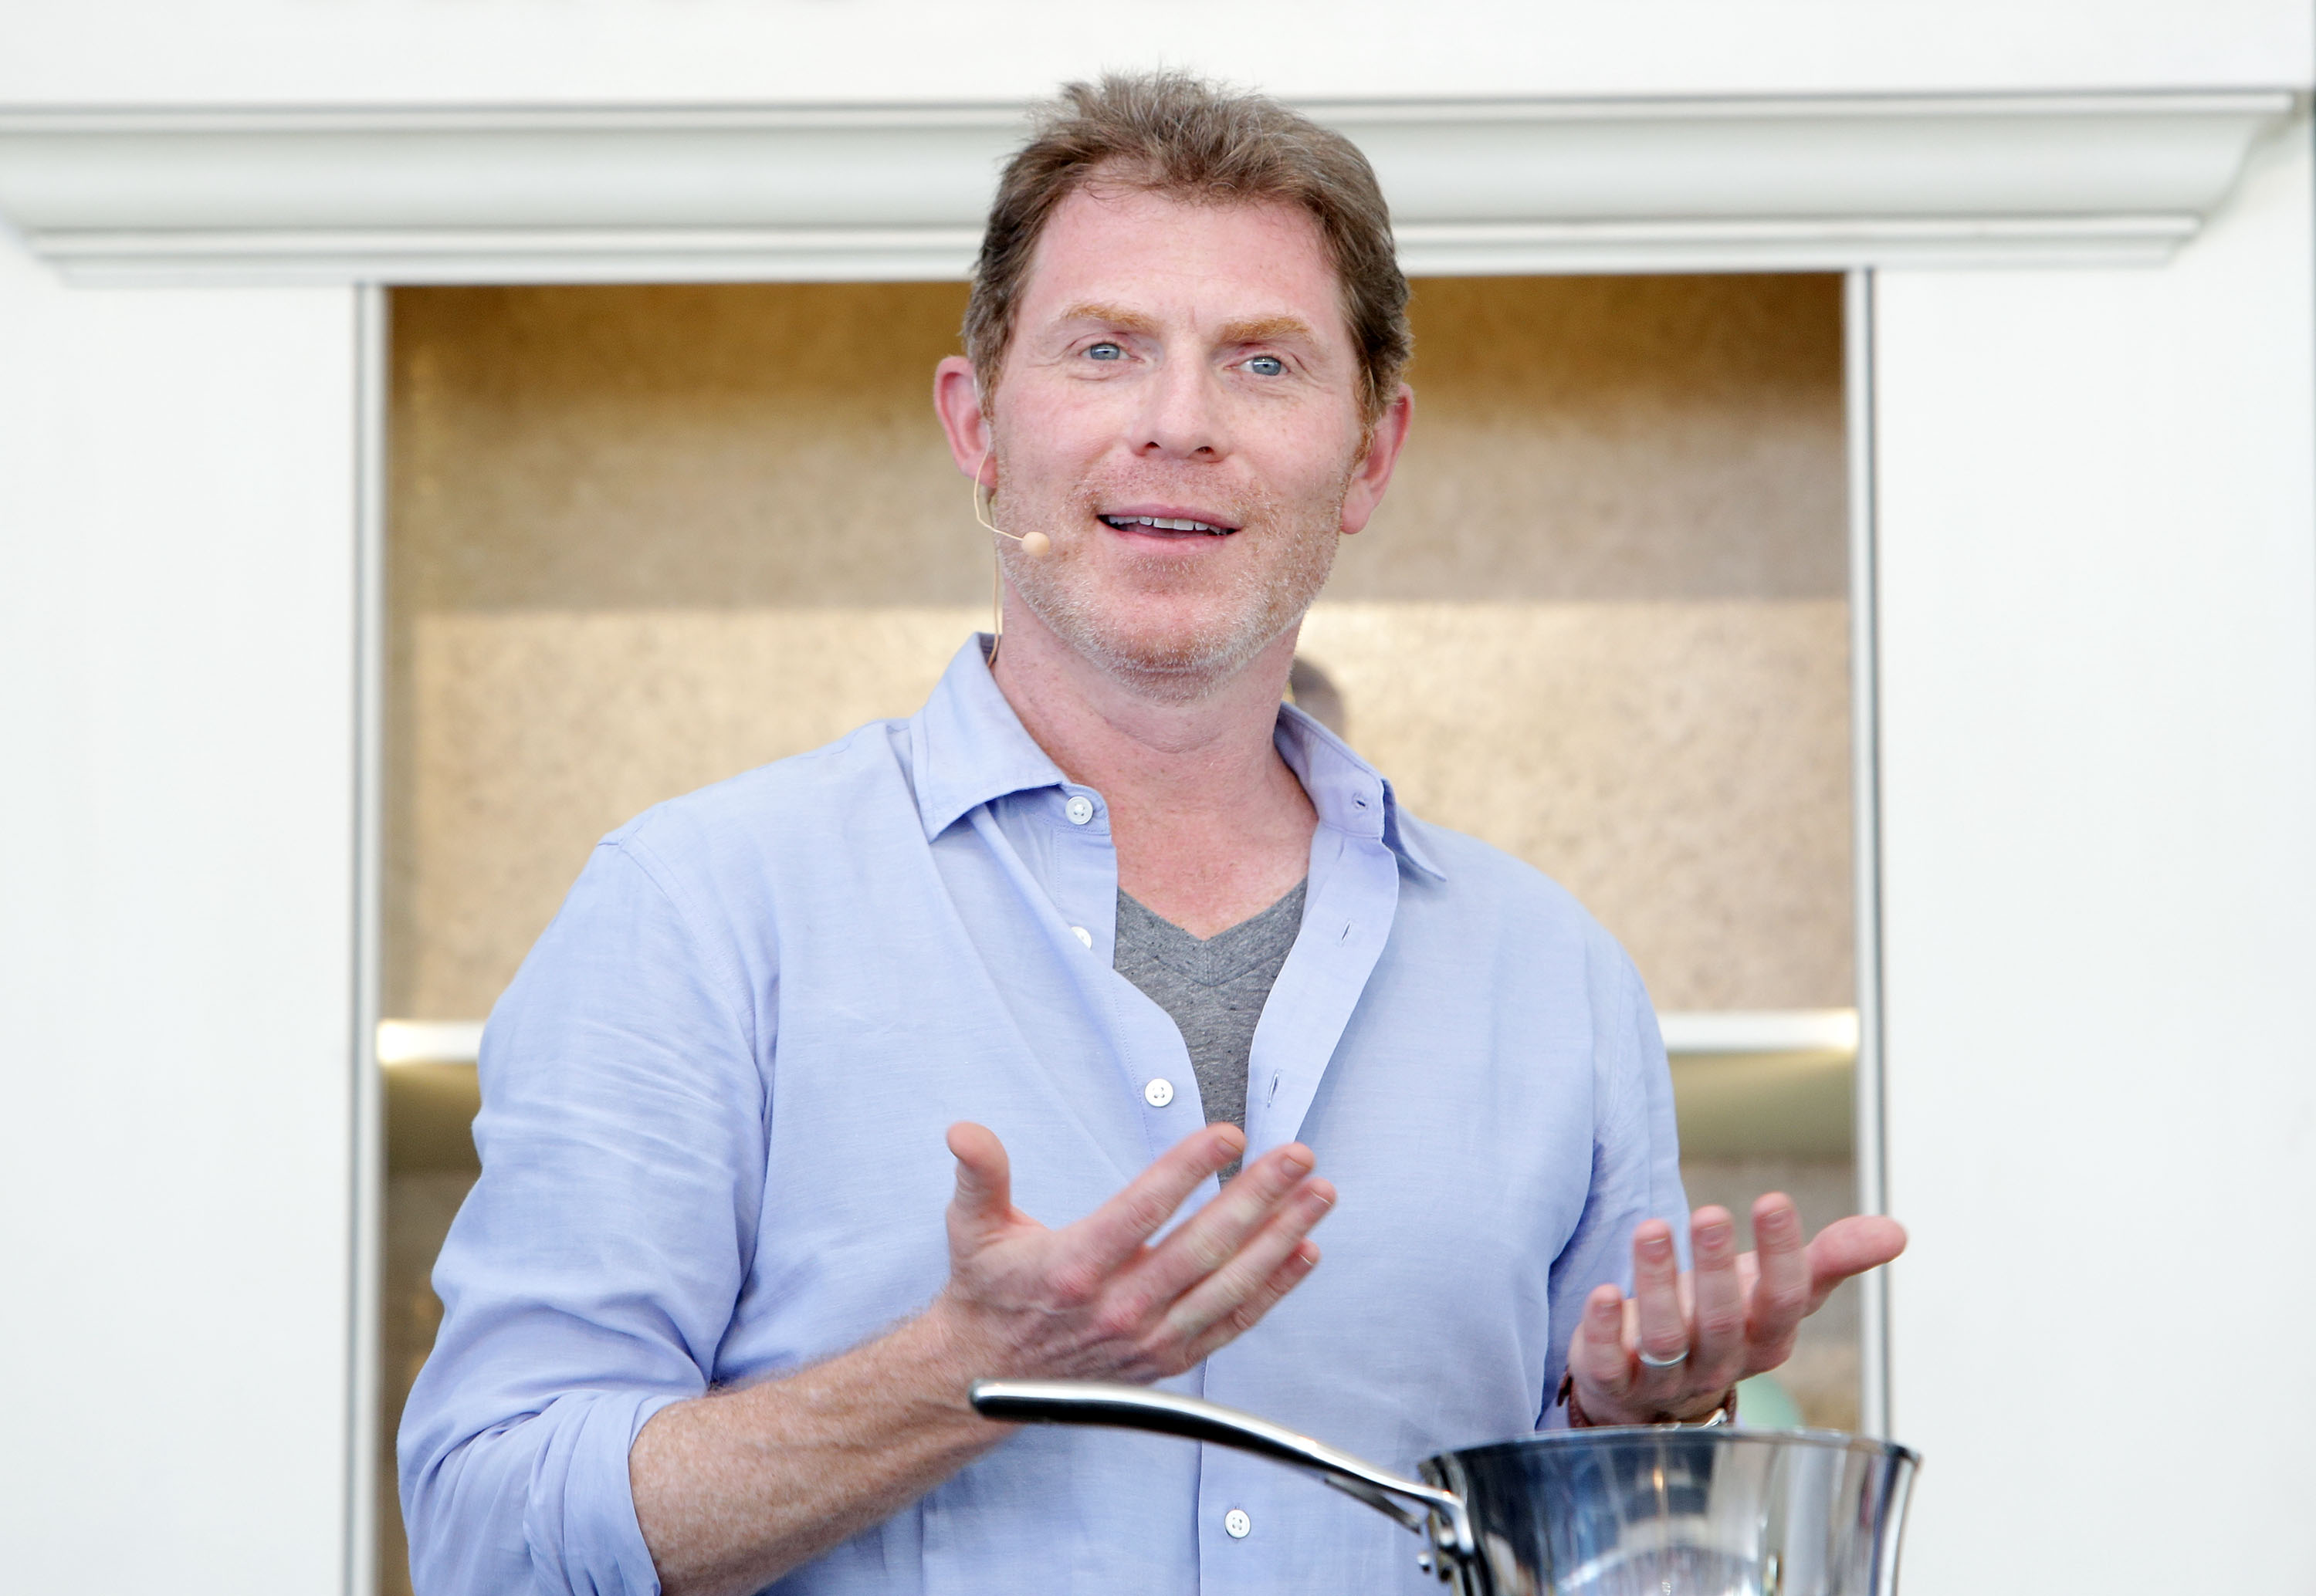 Food Network star Bobby Flay wears a light blue button-down shirt at a 2013 event.